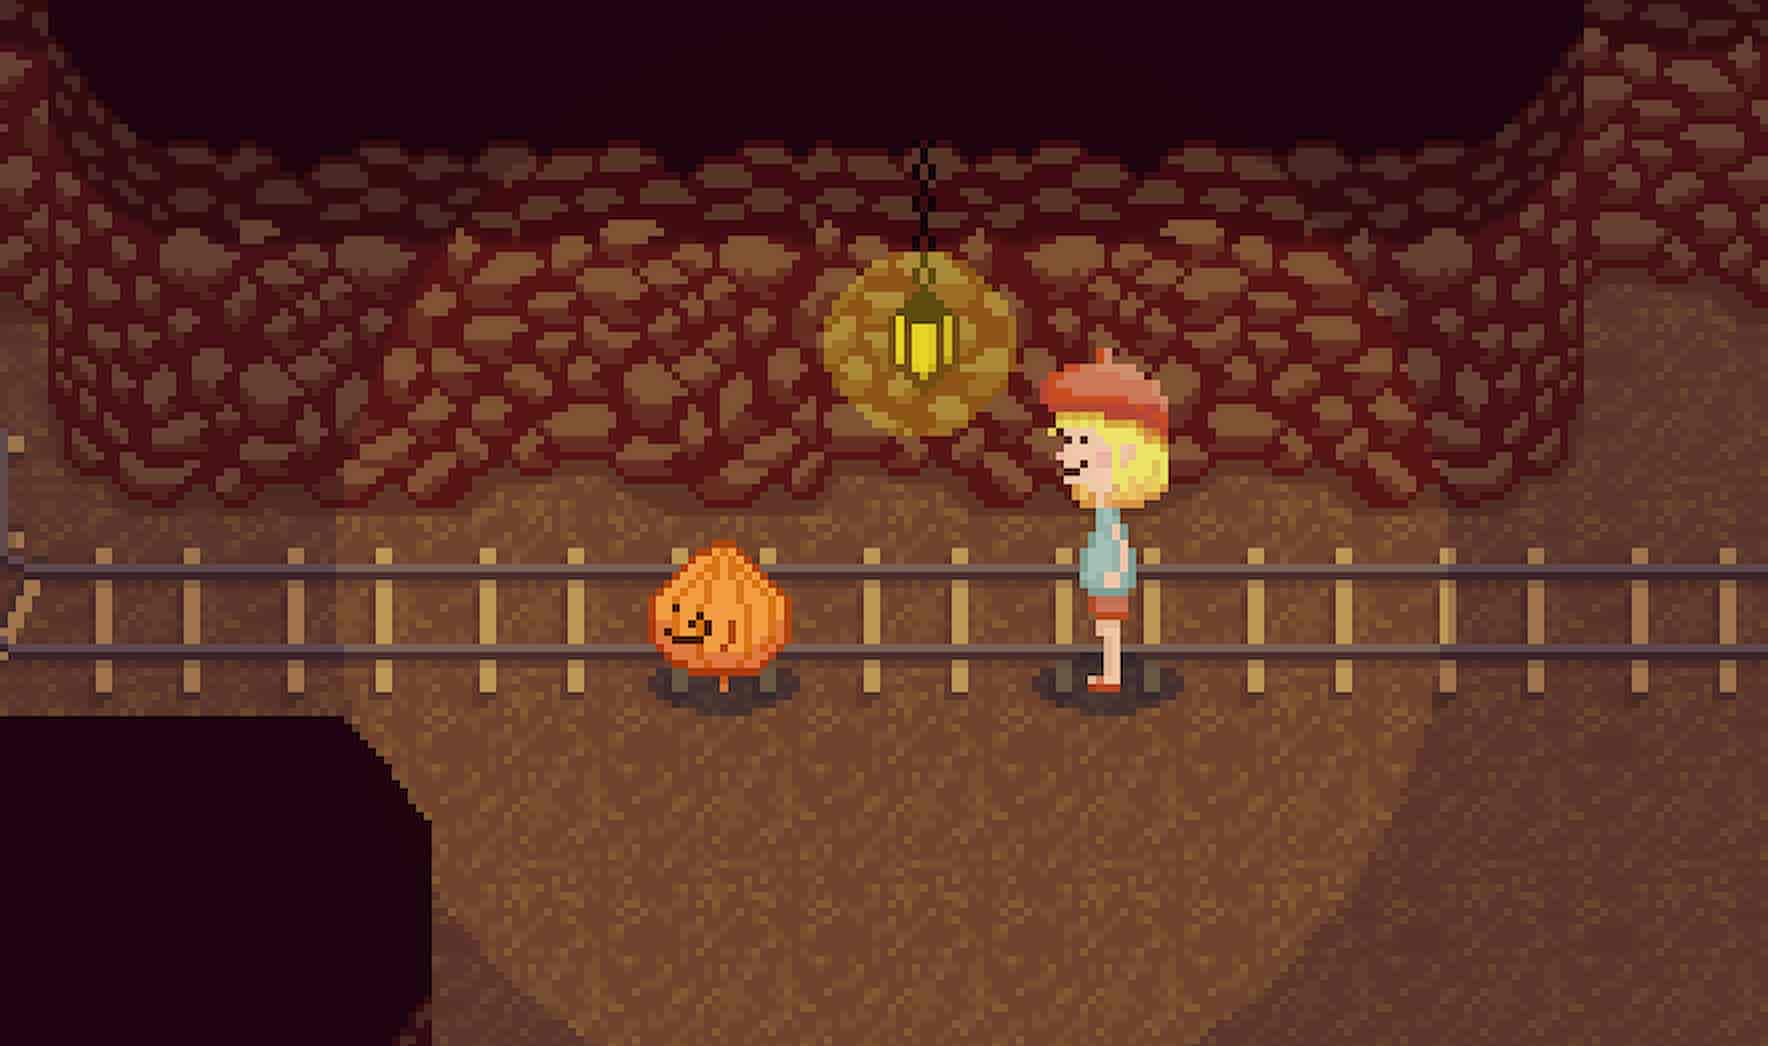 Scene from Tearful Heart showing two characters, Chipaul and Alex, in a cave with a glowing lantern and a minecart track